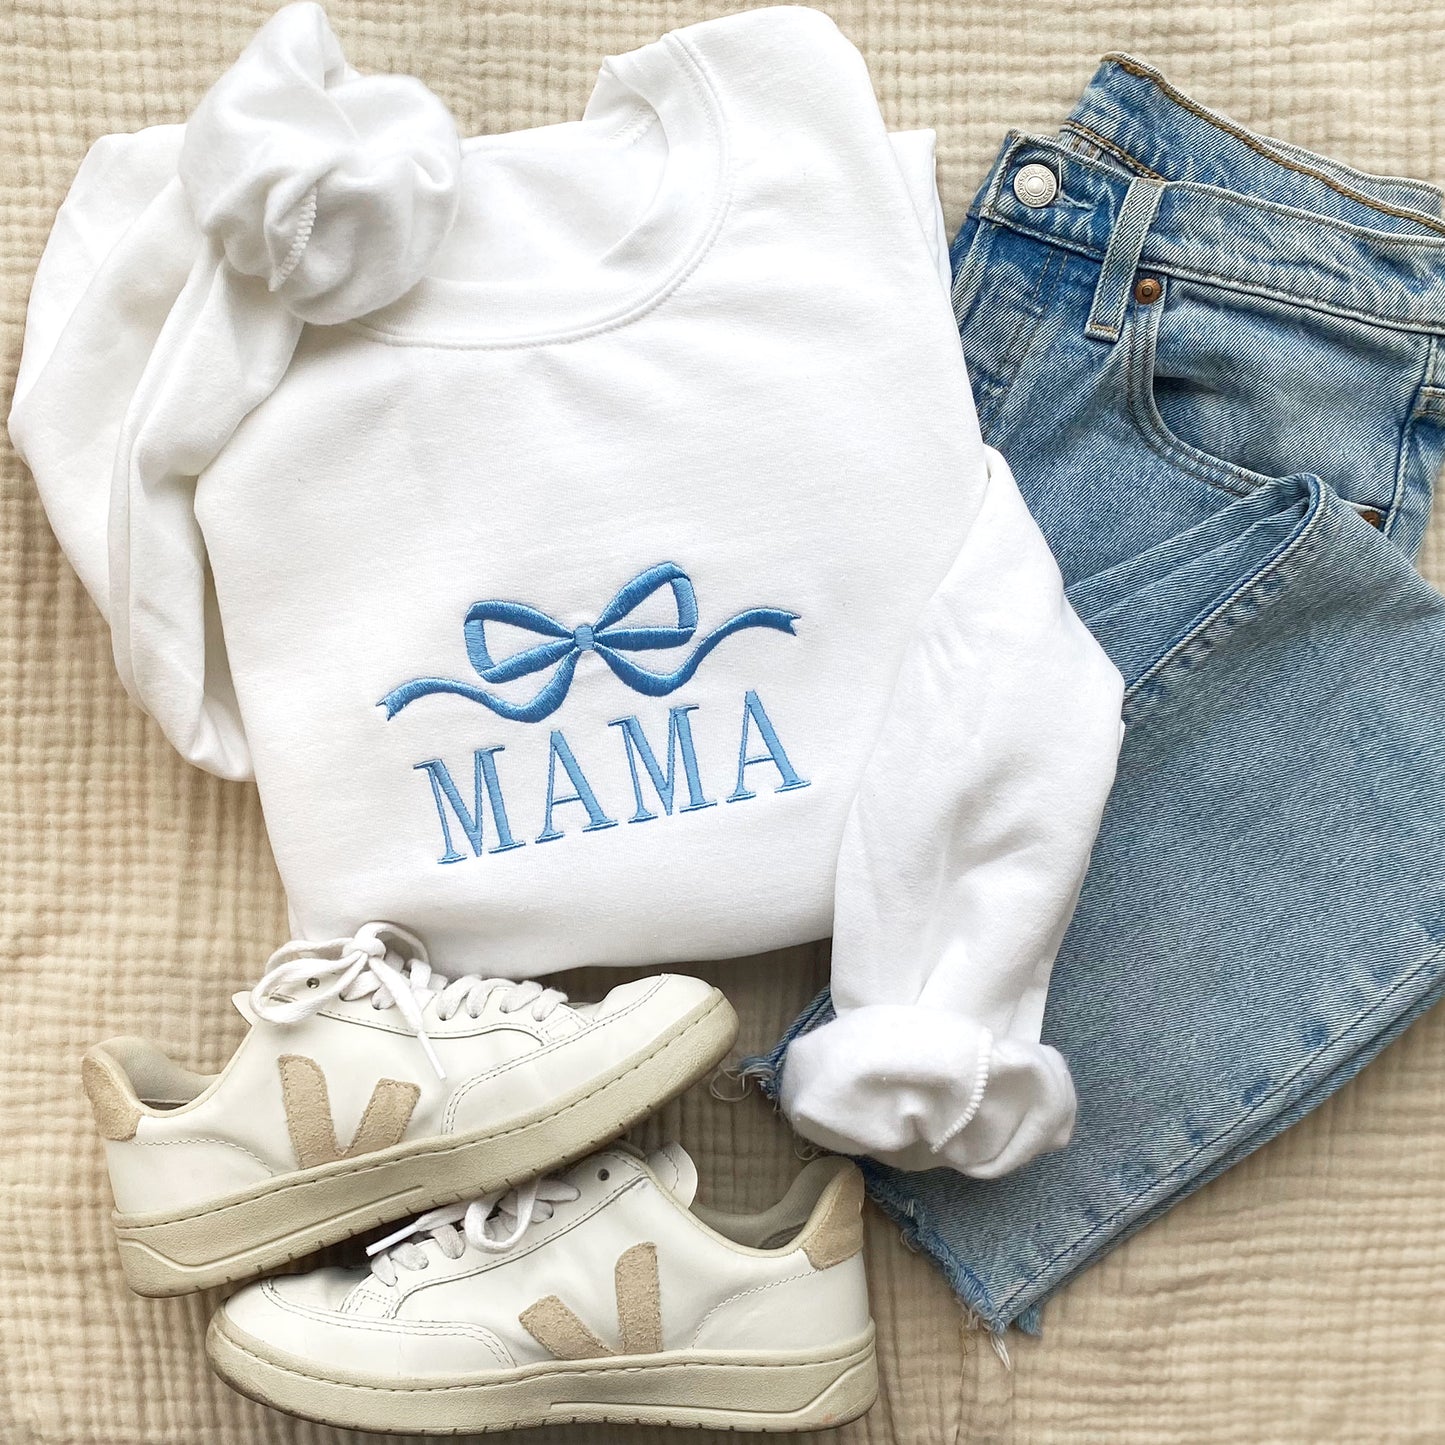 styled flat lay photo of a white crewneck sweatshirt with embroidered bow and all caps mama across the chest in baby blue thread with jeans, jewelry, and sneakers